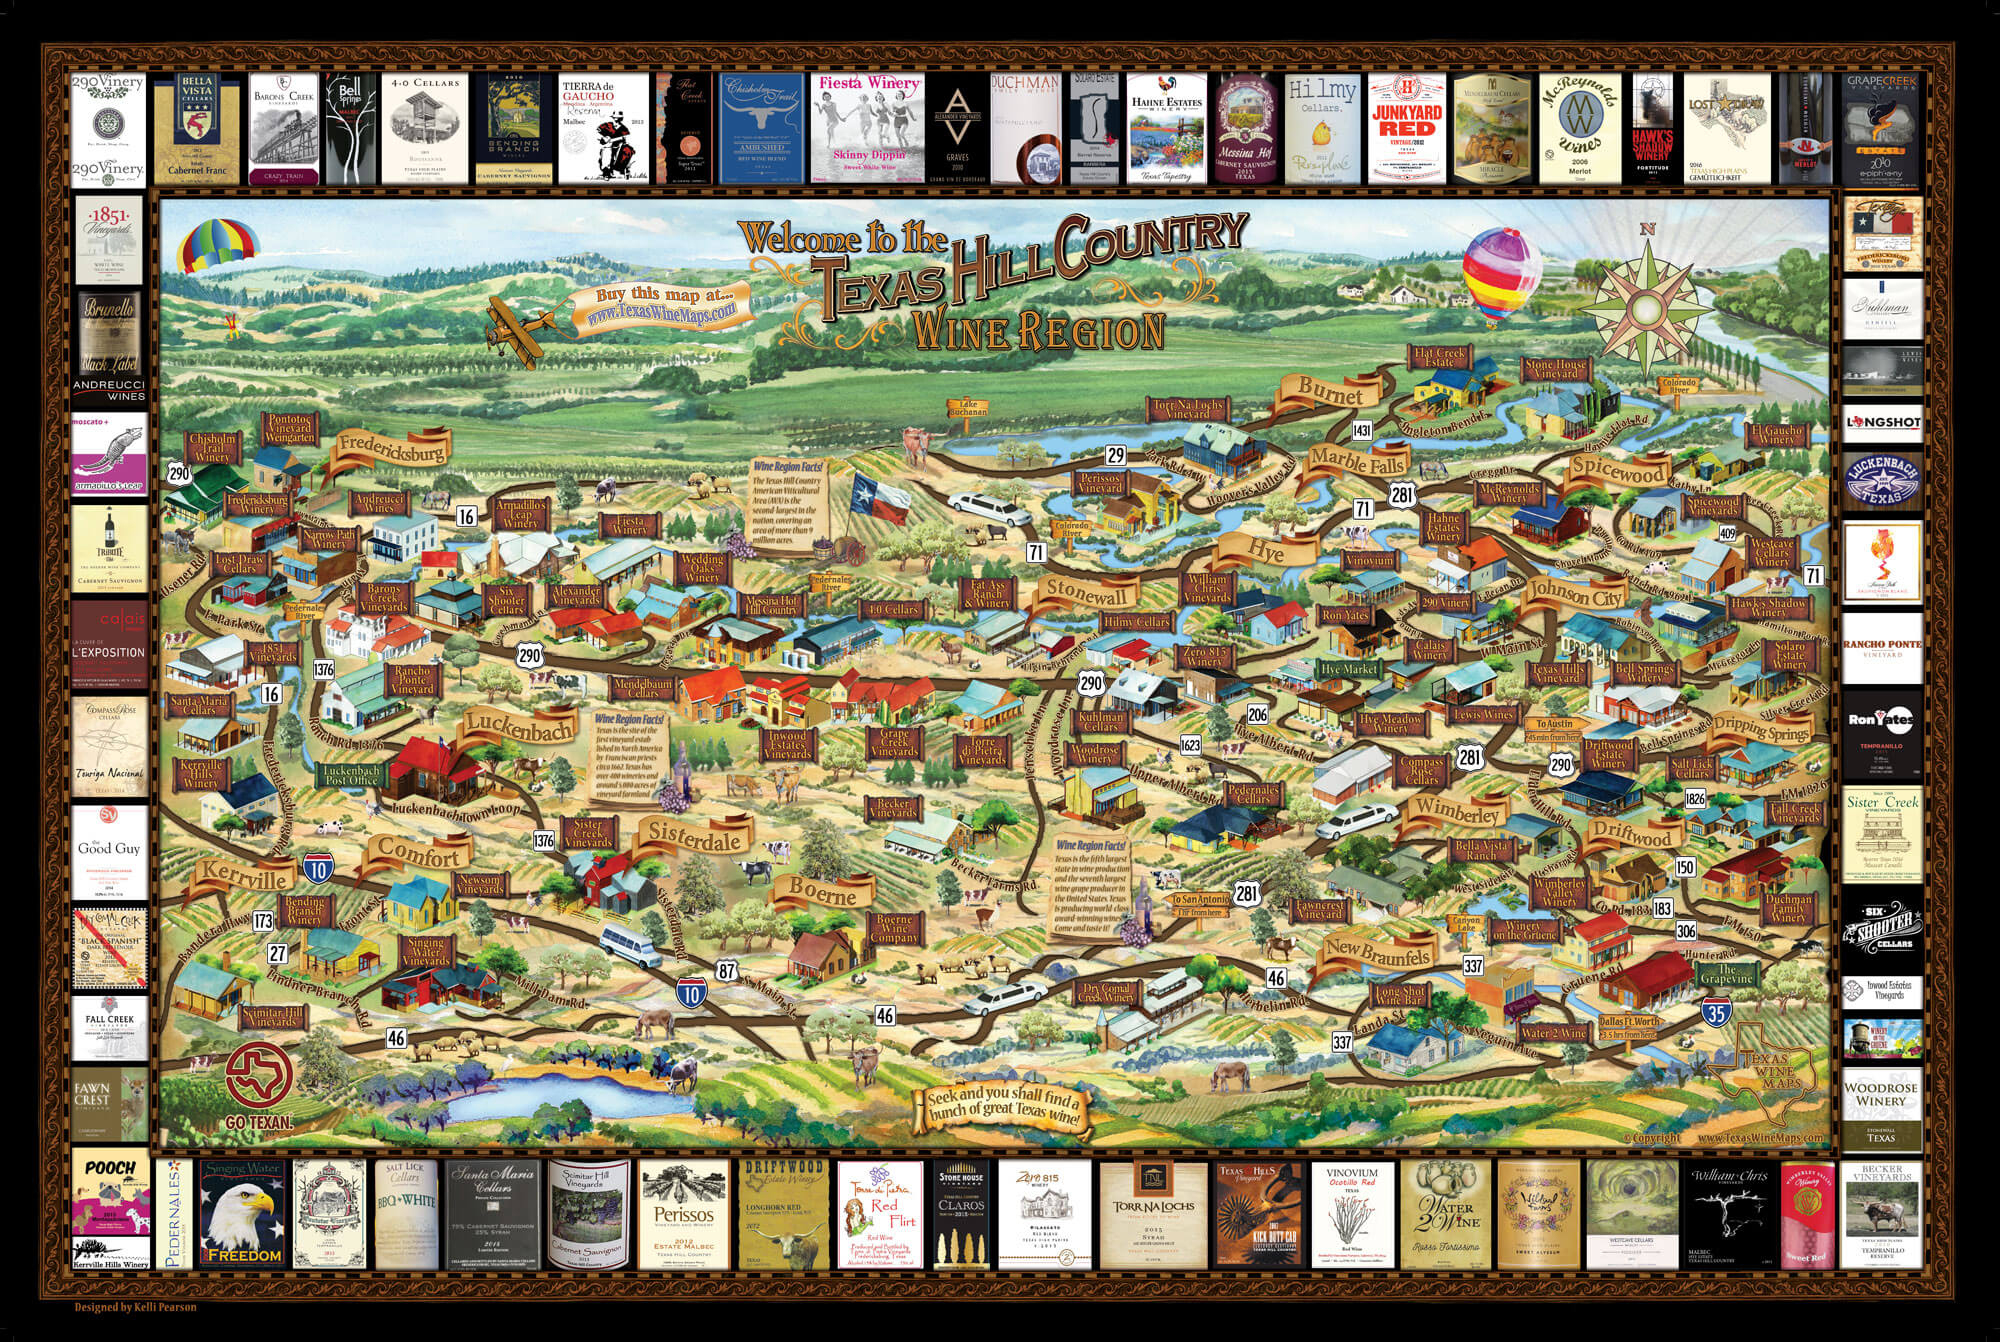 Laminated Texas Wine Map | Texas Wineries Map |Texas Hill Country - Texas Winery Map